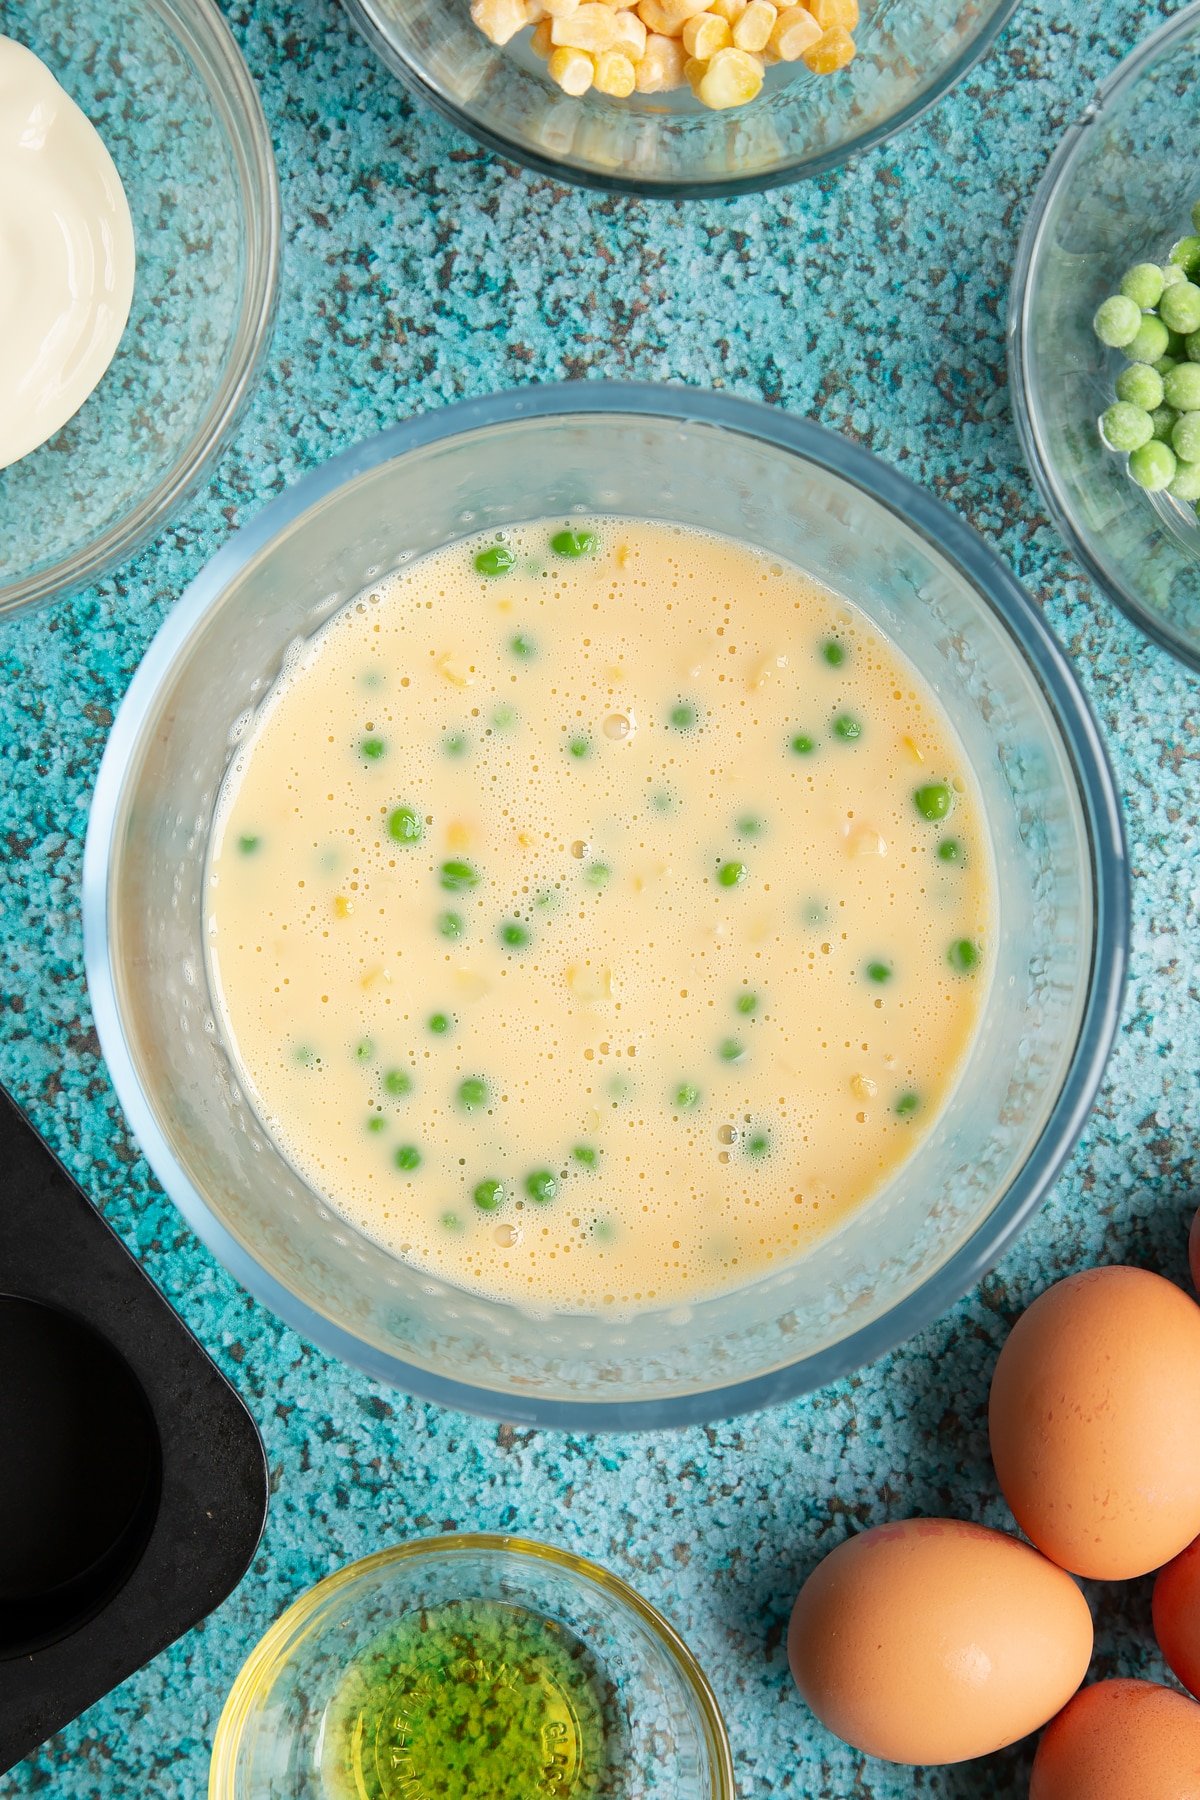 Eggs and cream cheese beaten together with peas and sweetcorn in a mixing bowl. Ingredients to make mini vegetable frittatas surround the bowl.